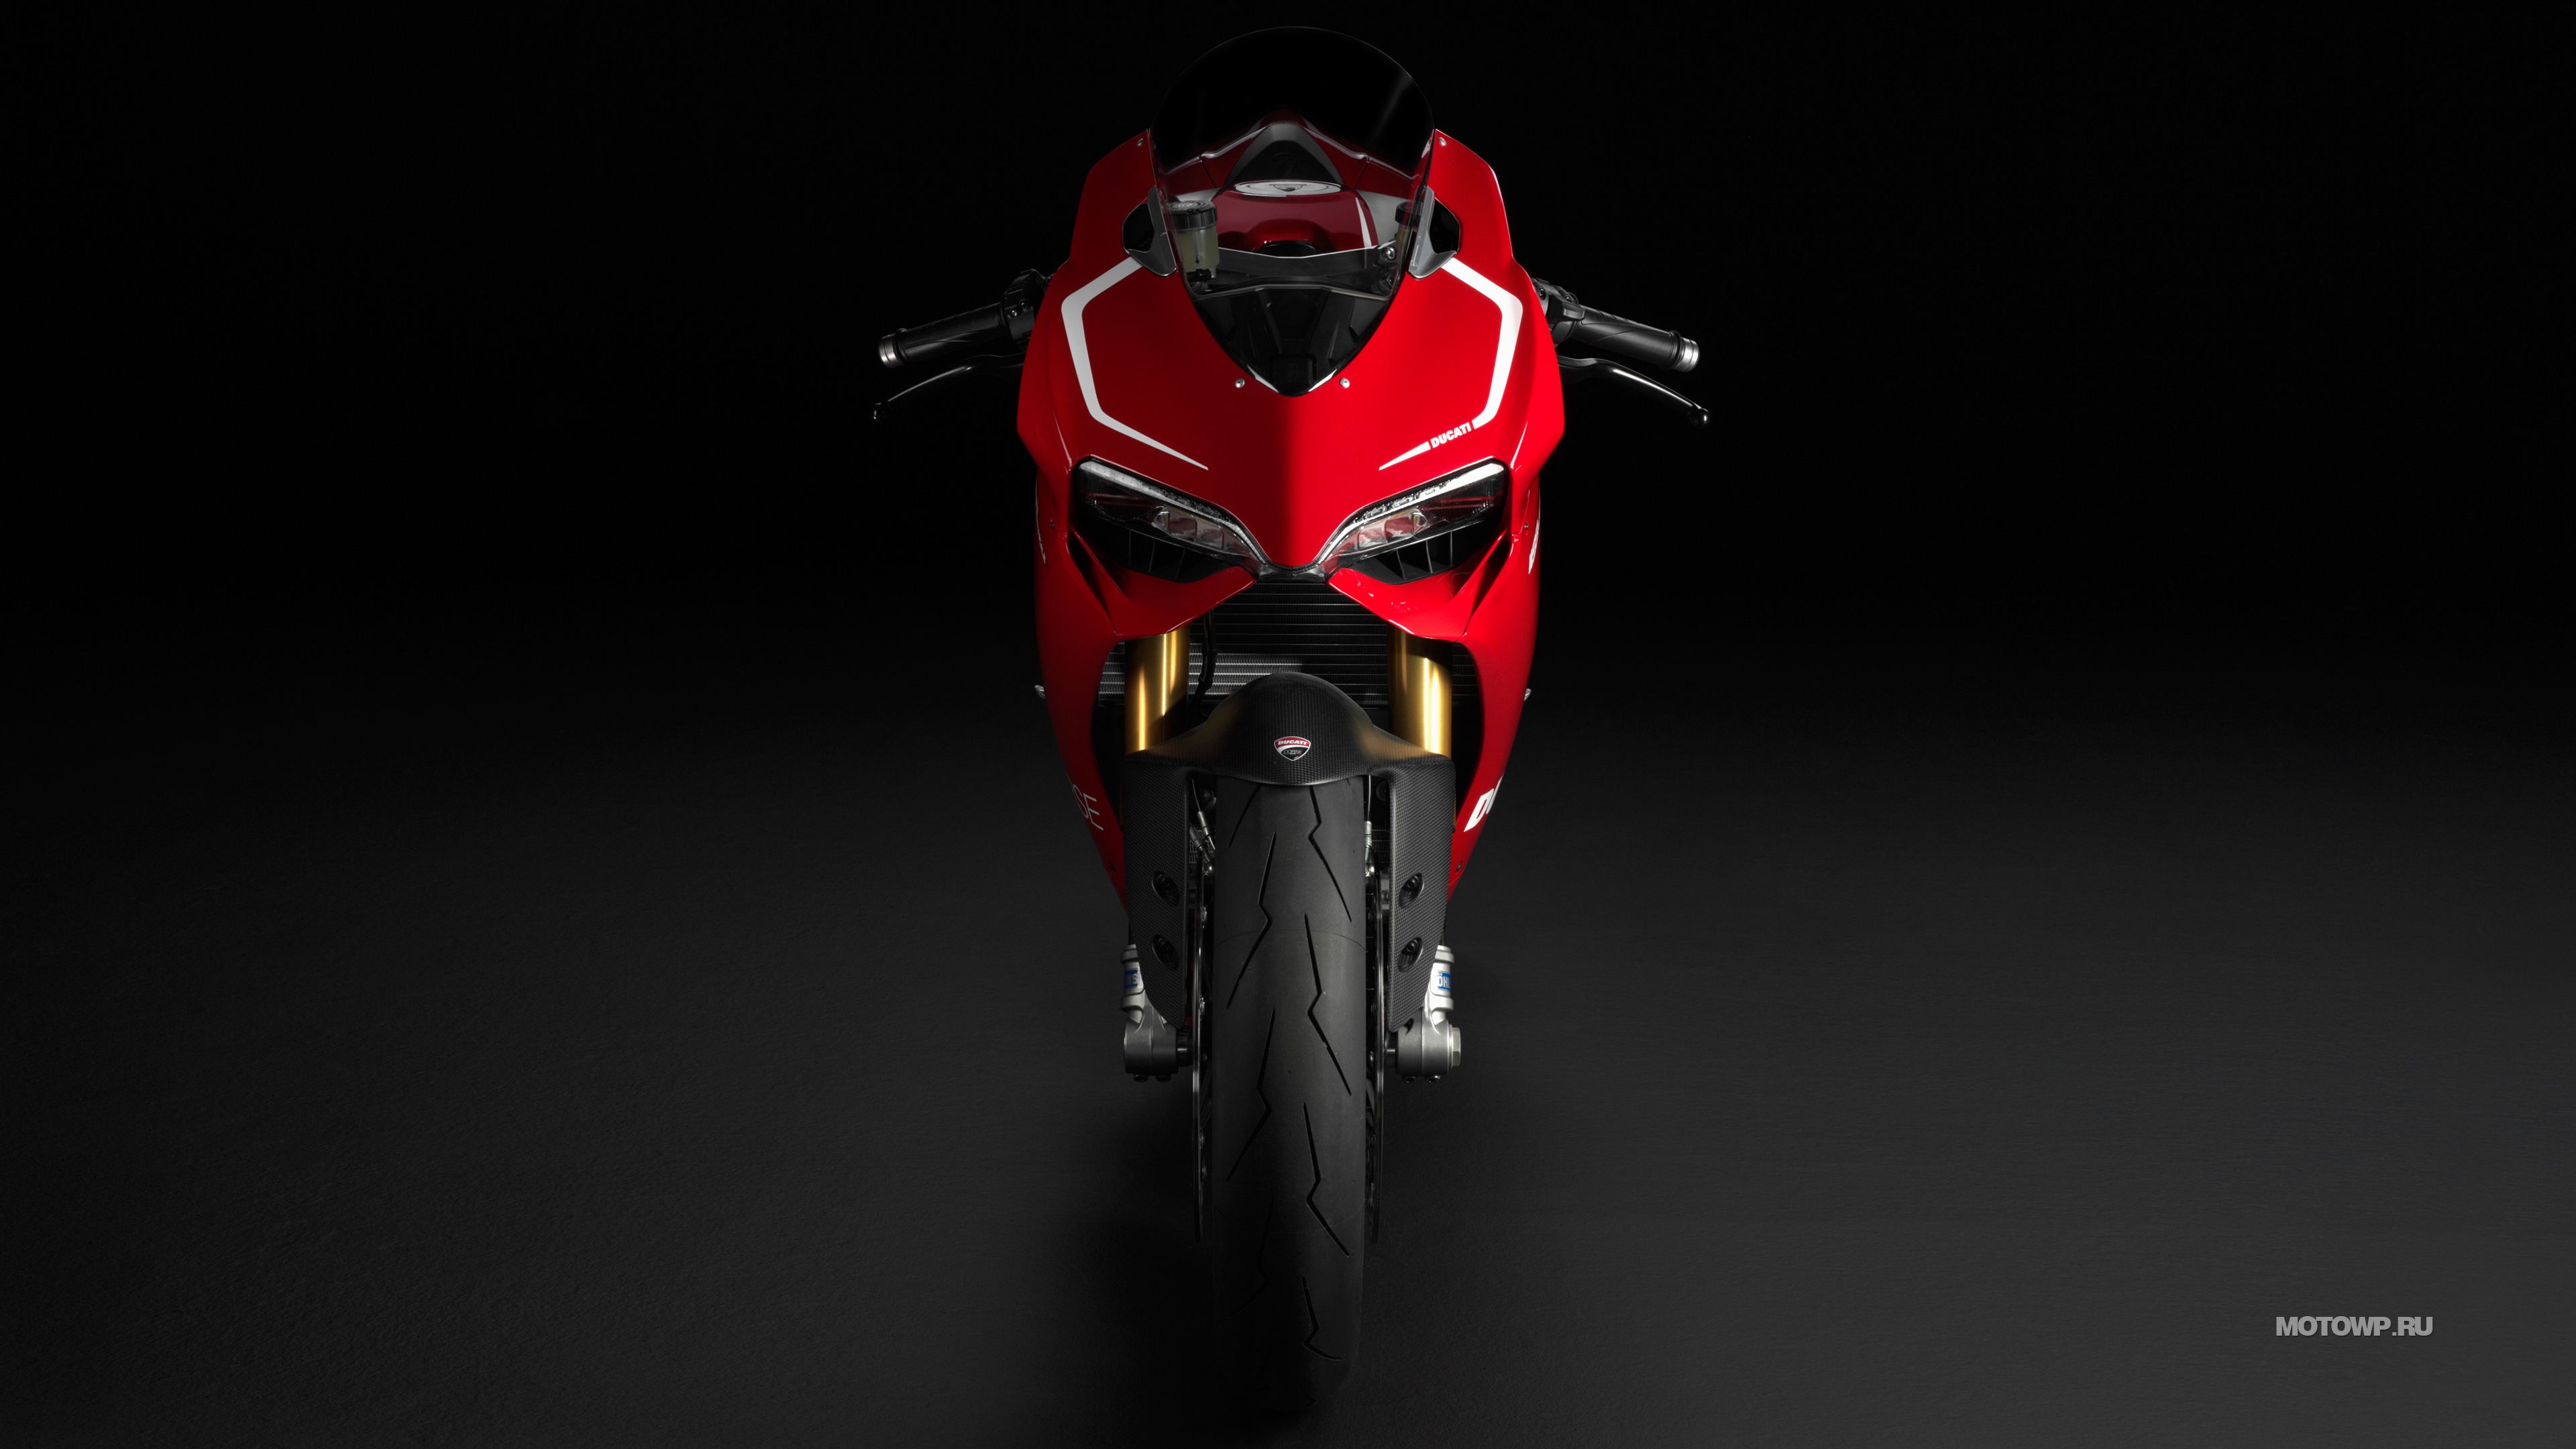 Ducati 1199 Panigale Backgrounds 4K Download